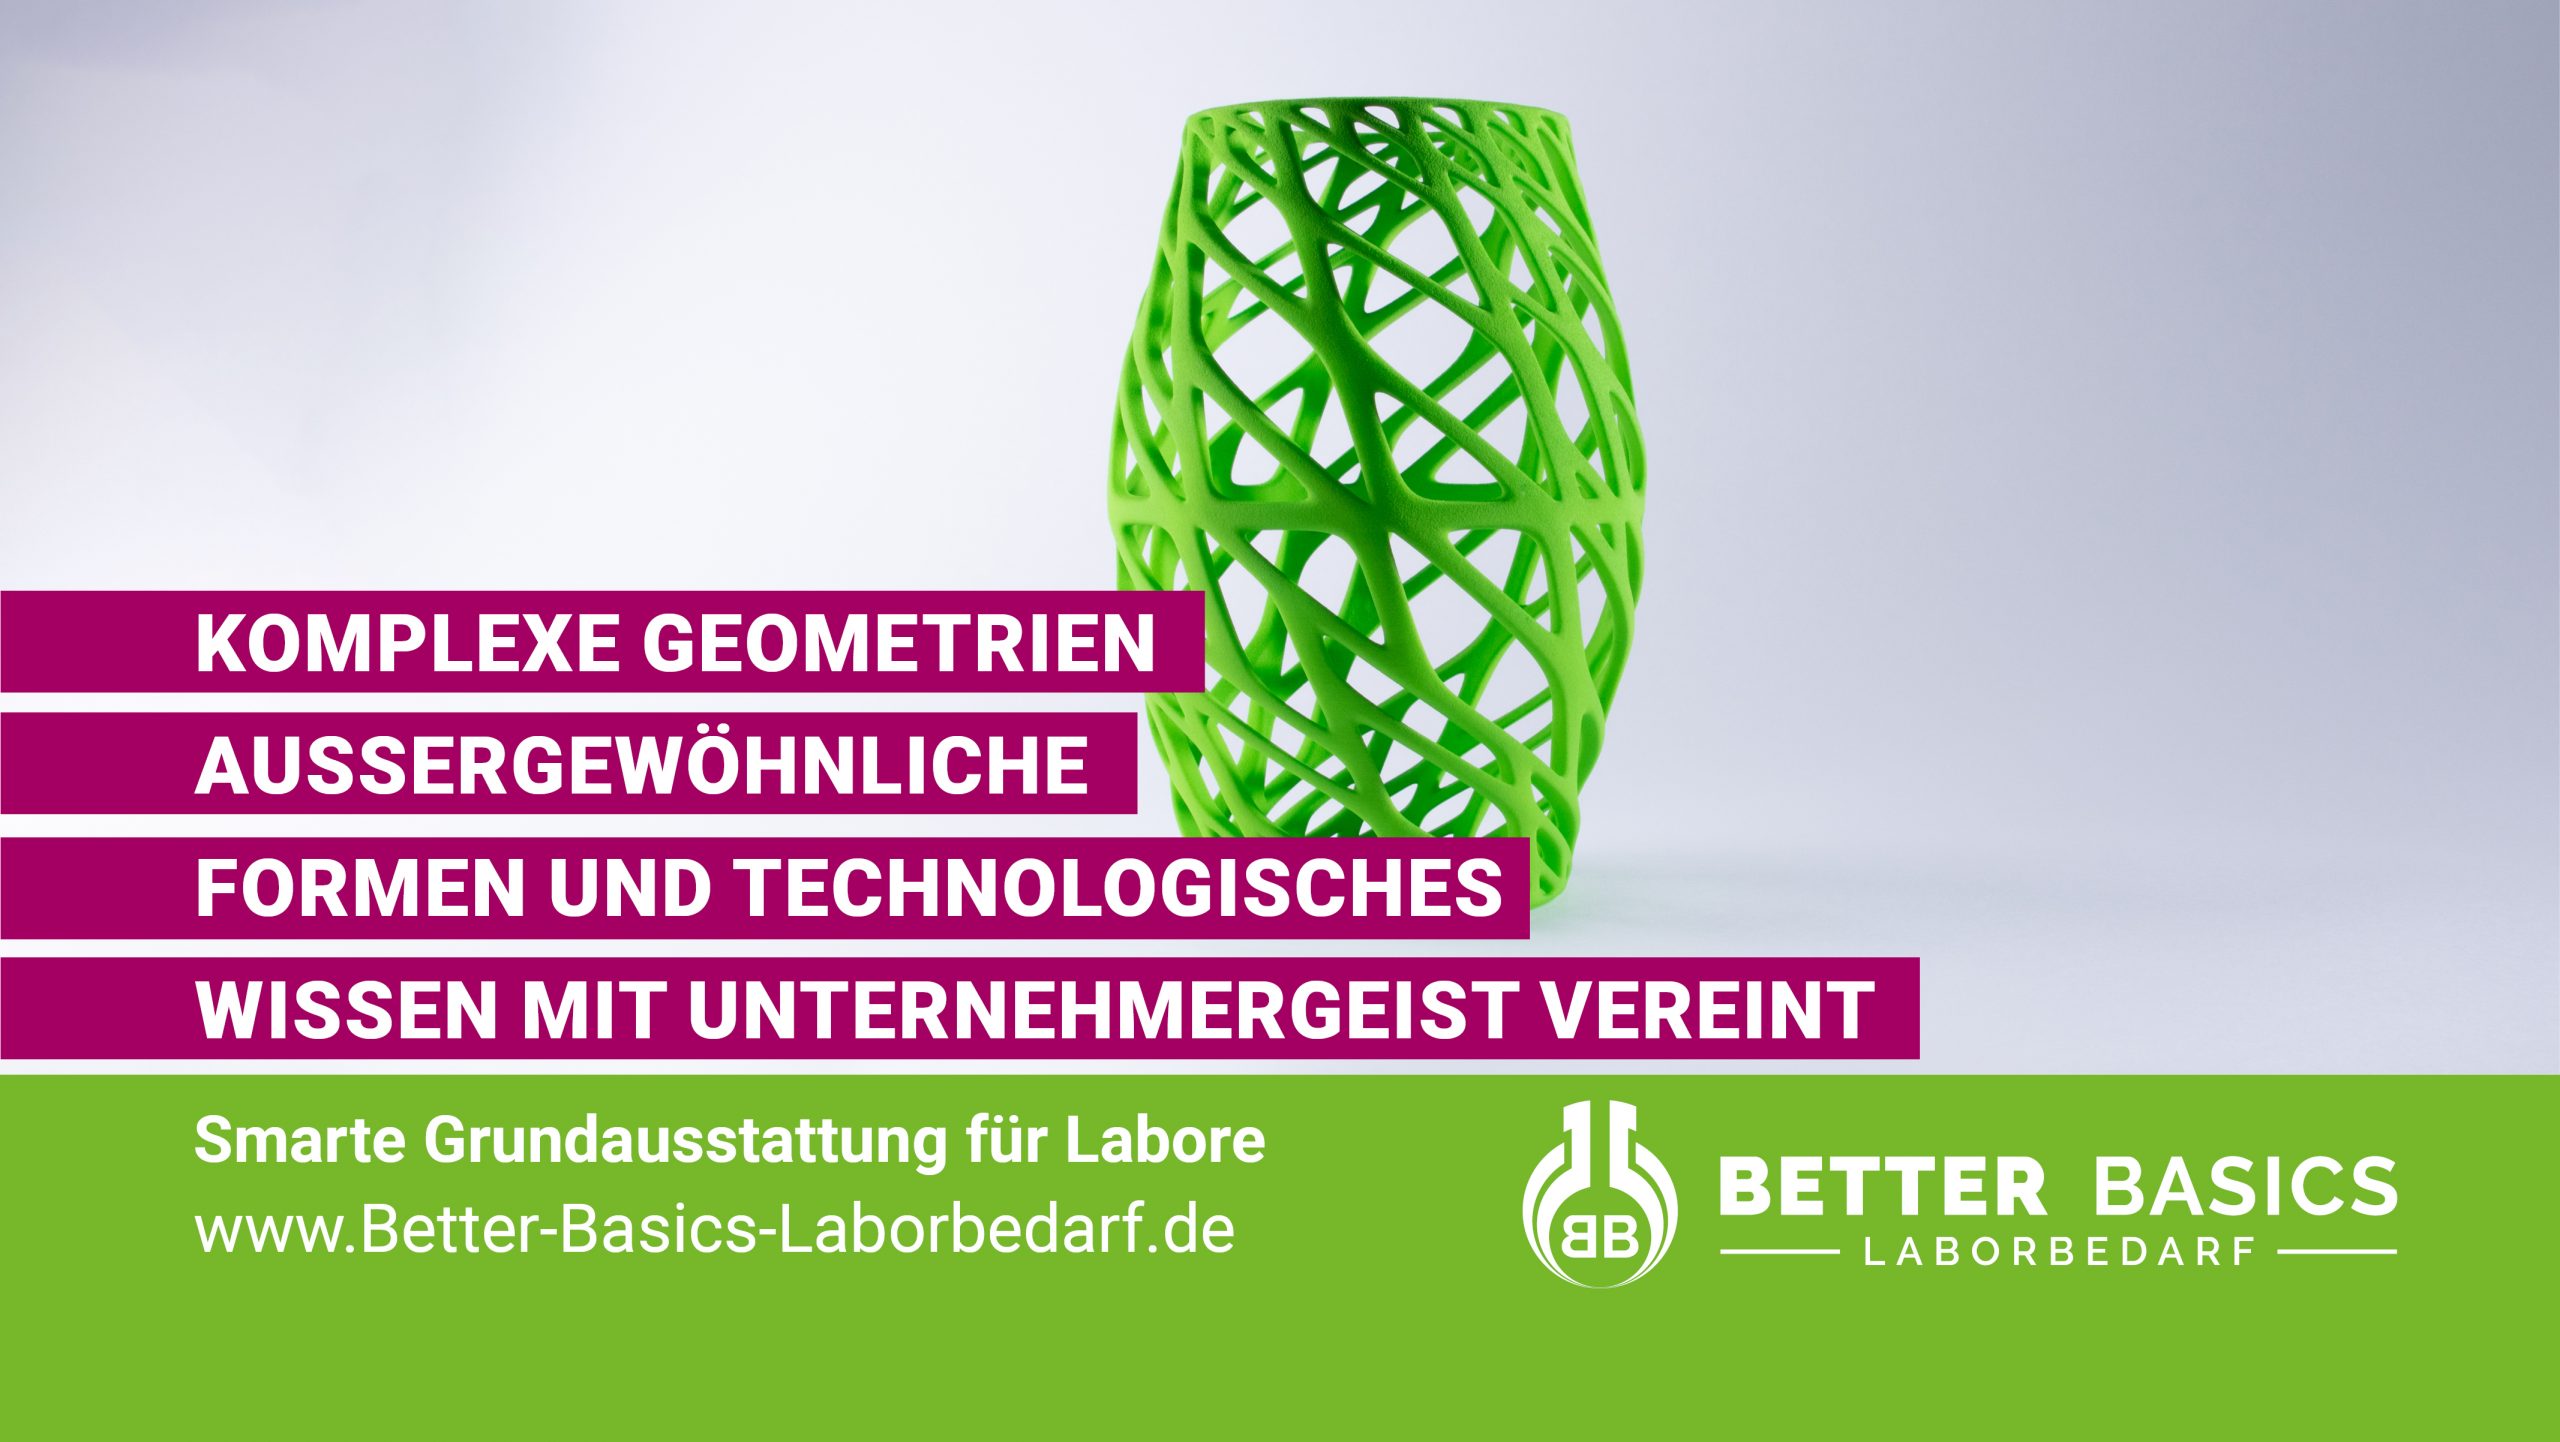 SLS 3D printing as an additive manufacturing process continues a technical tradition that began in Saxony in 1581.